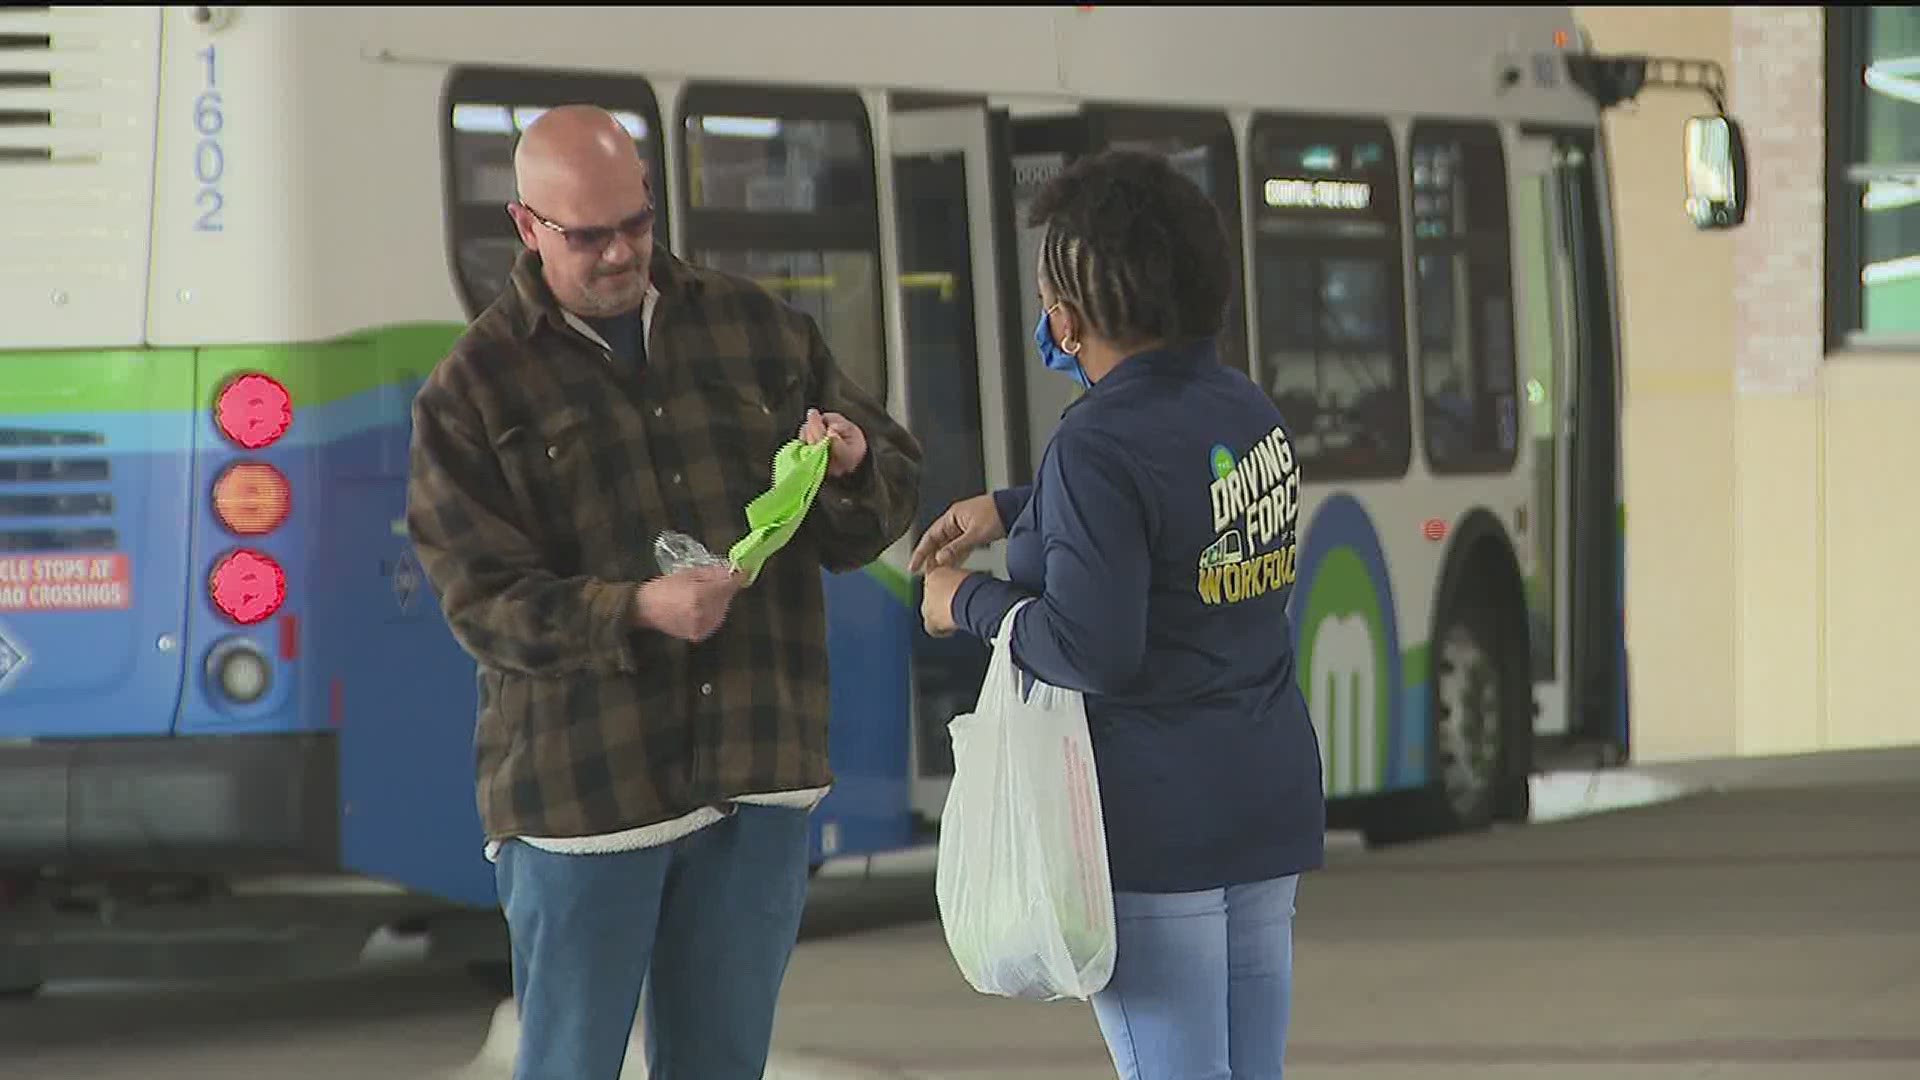 After several months of suspension, the major bus lines of the Quad Cities will start charging again soon.